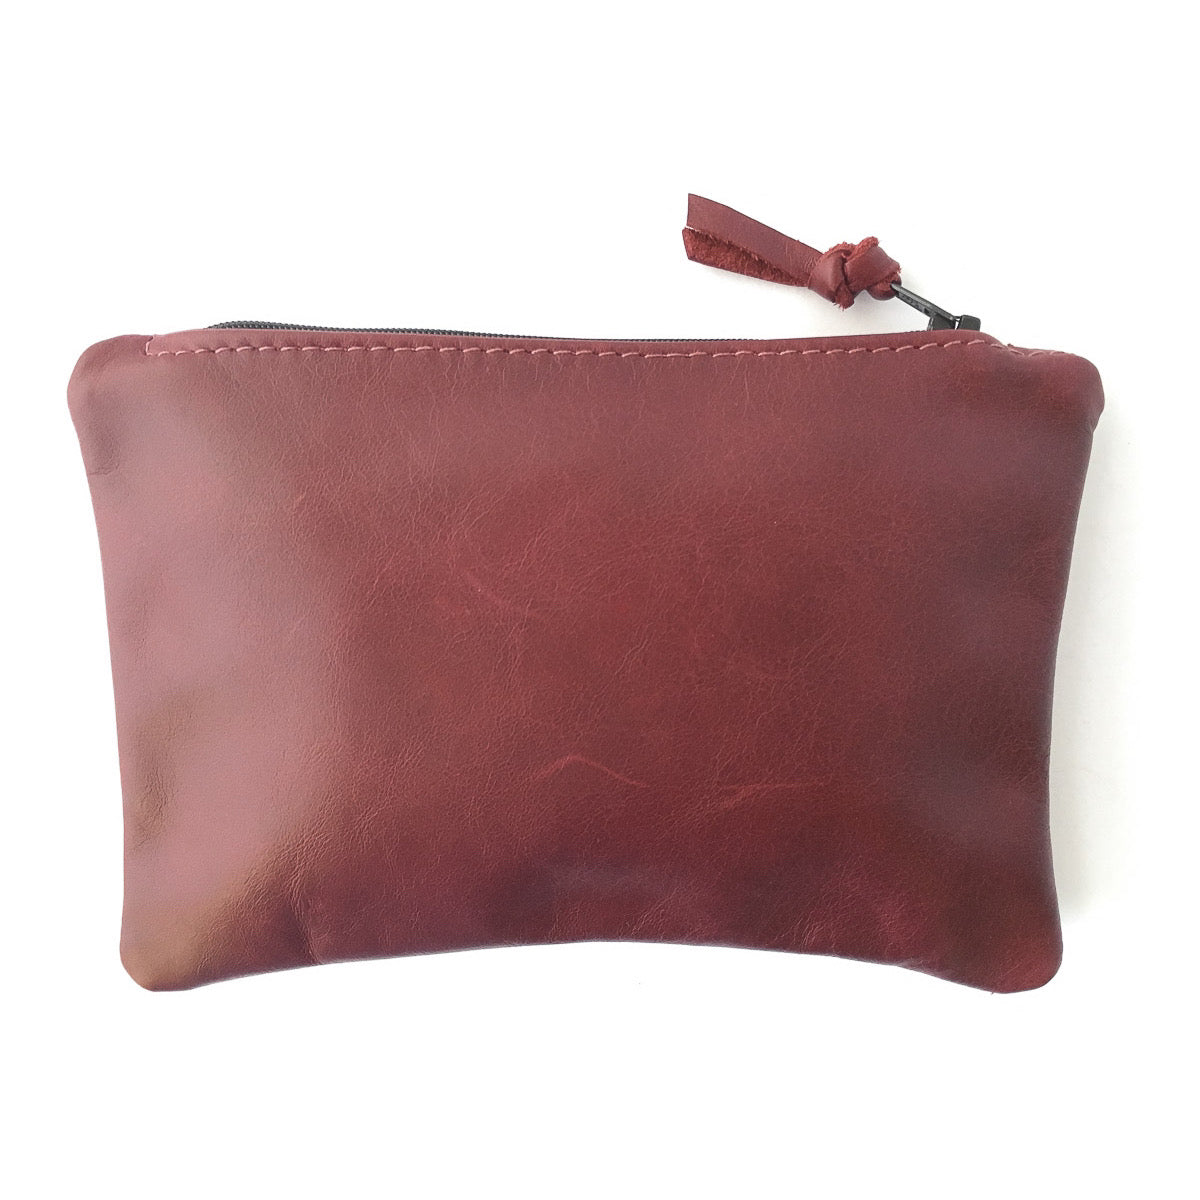 Leather Zip Purse - Oxblood Red